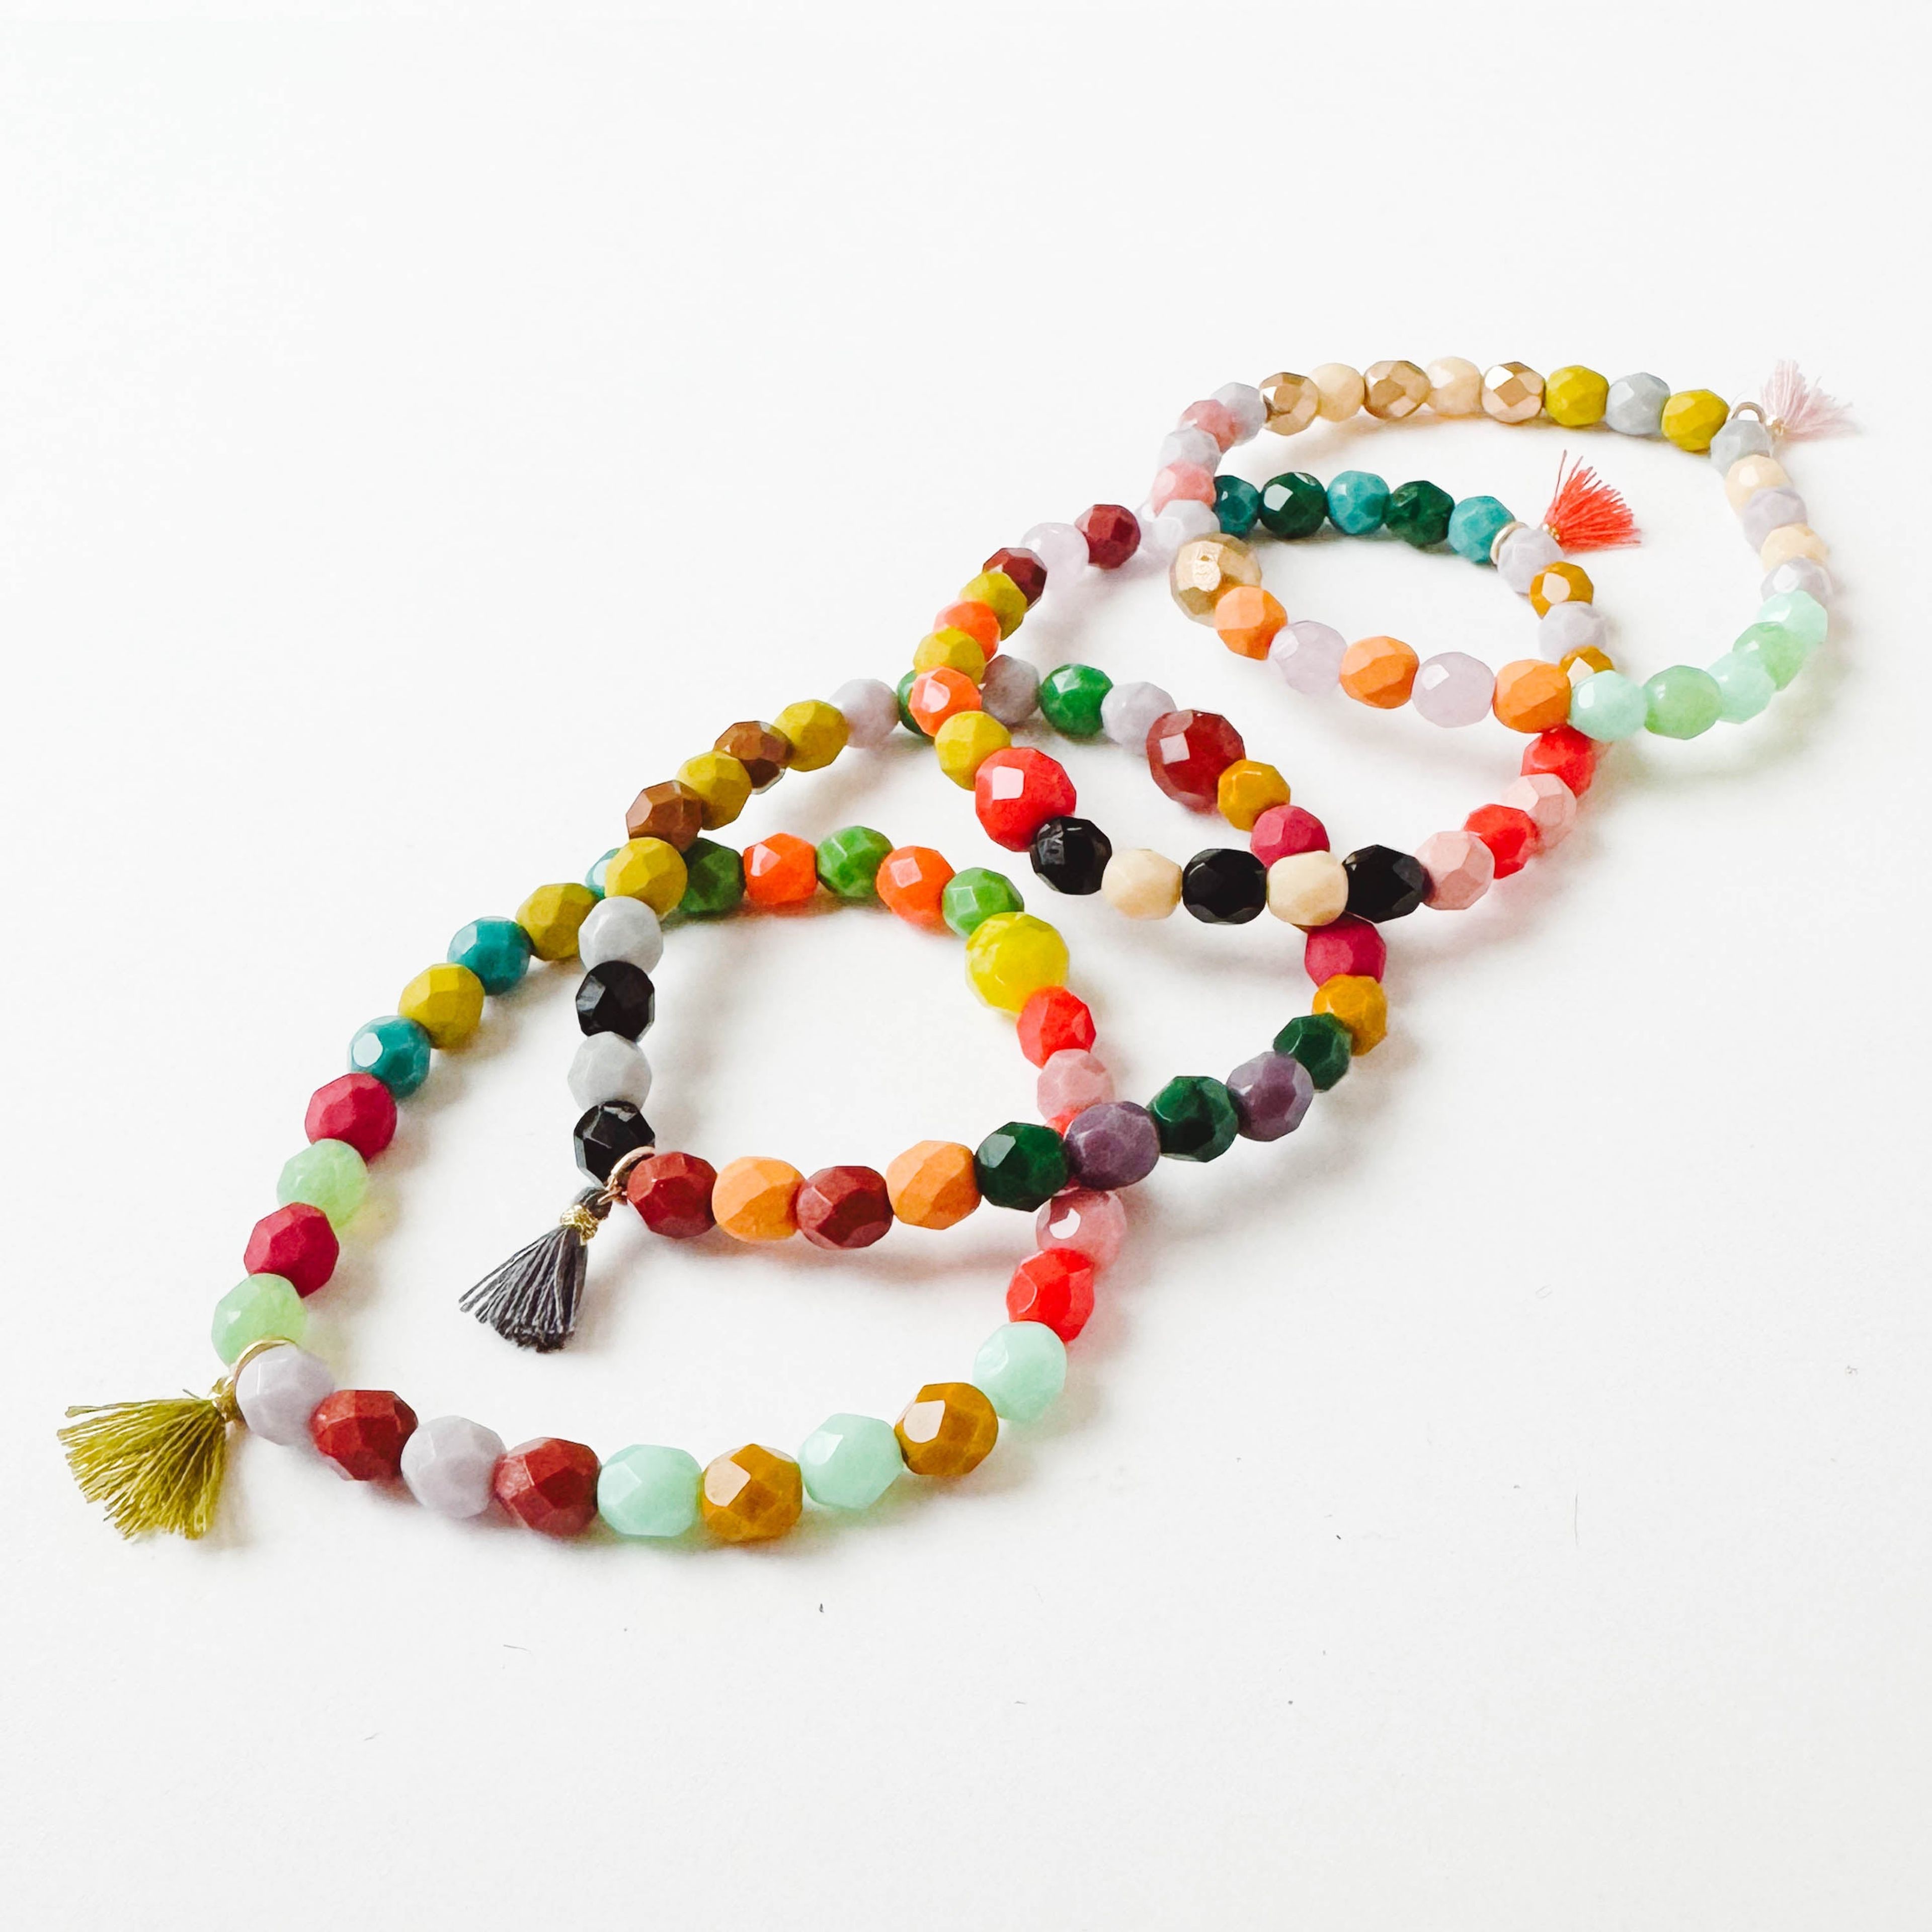 Colorful Bead Bracelet With Tassel - WS